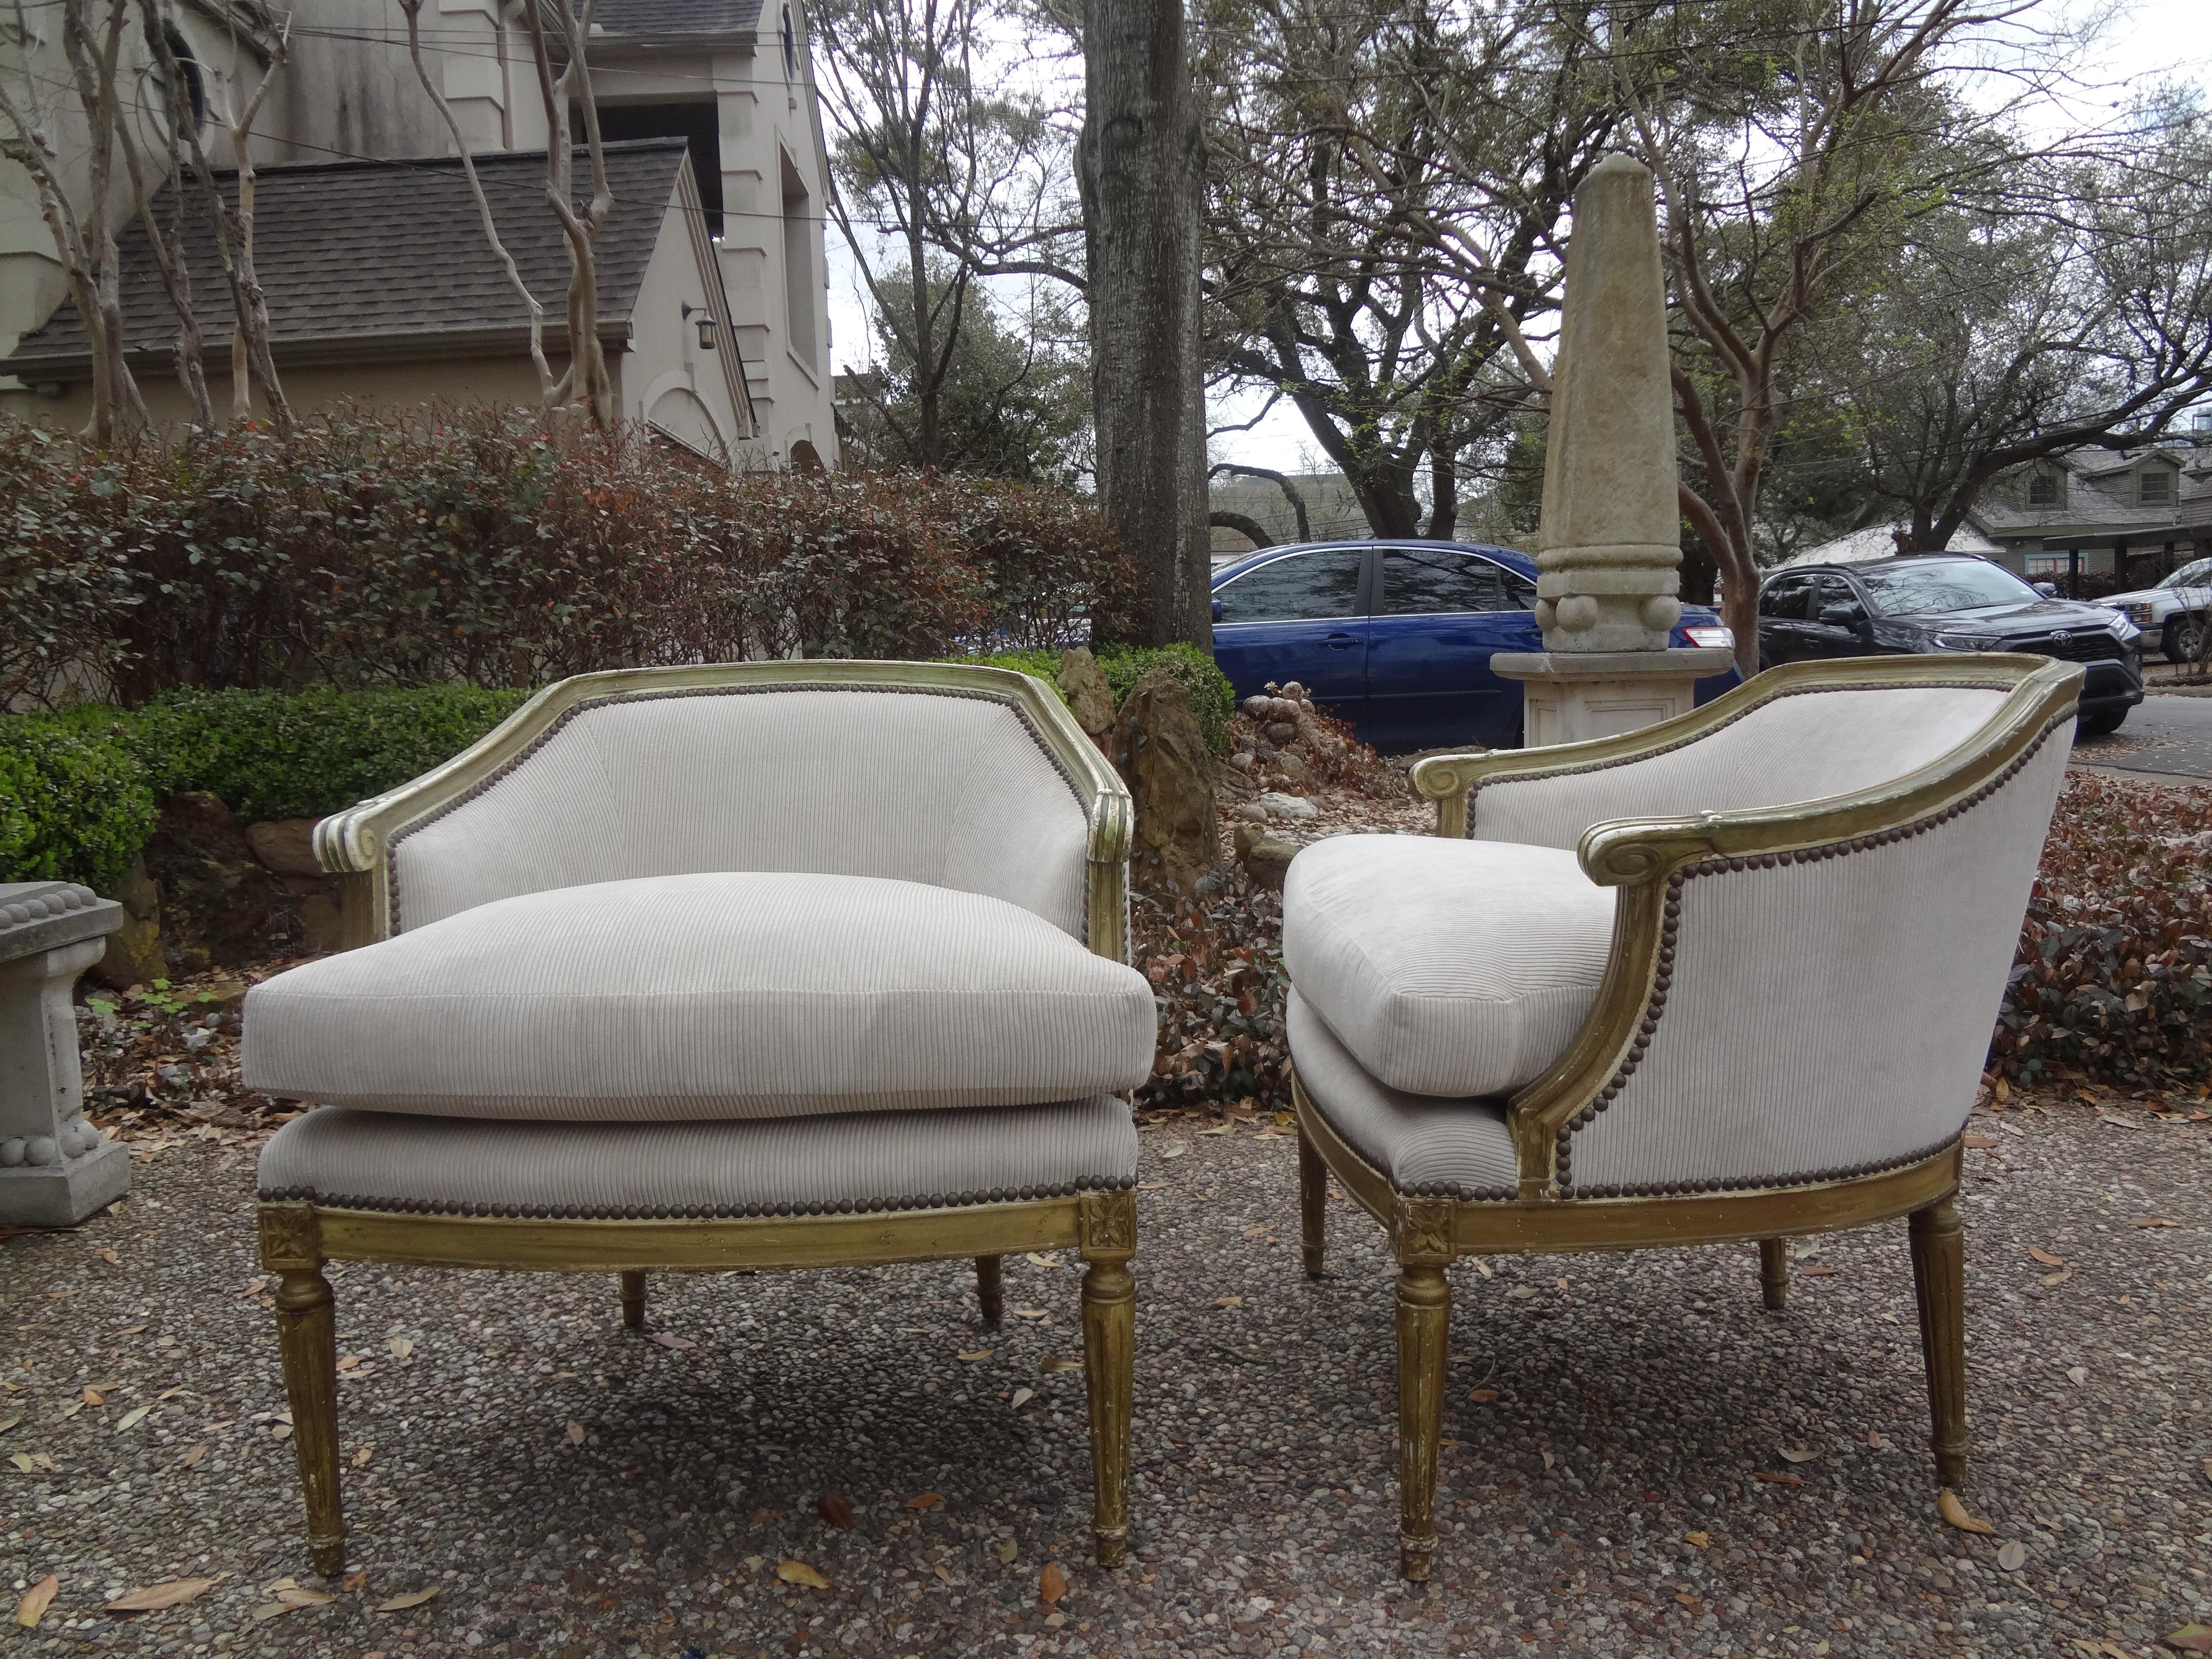 Stunning pair of antique French Louis XVI style polychromed bergère. Our pair of French bergère chairs have been professionally upholstered in a beautiful neutral taupe cut velvet in a corduroy style pattern with brass nail head detail. This clean